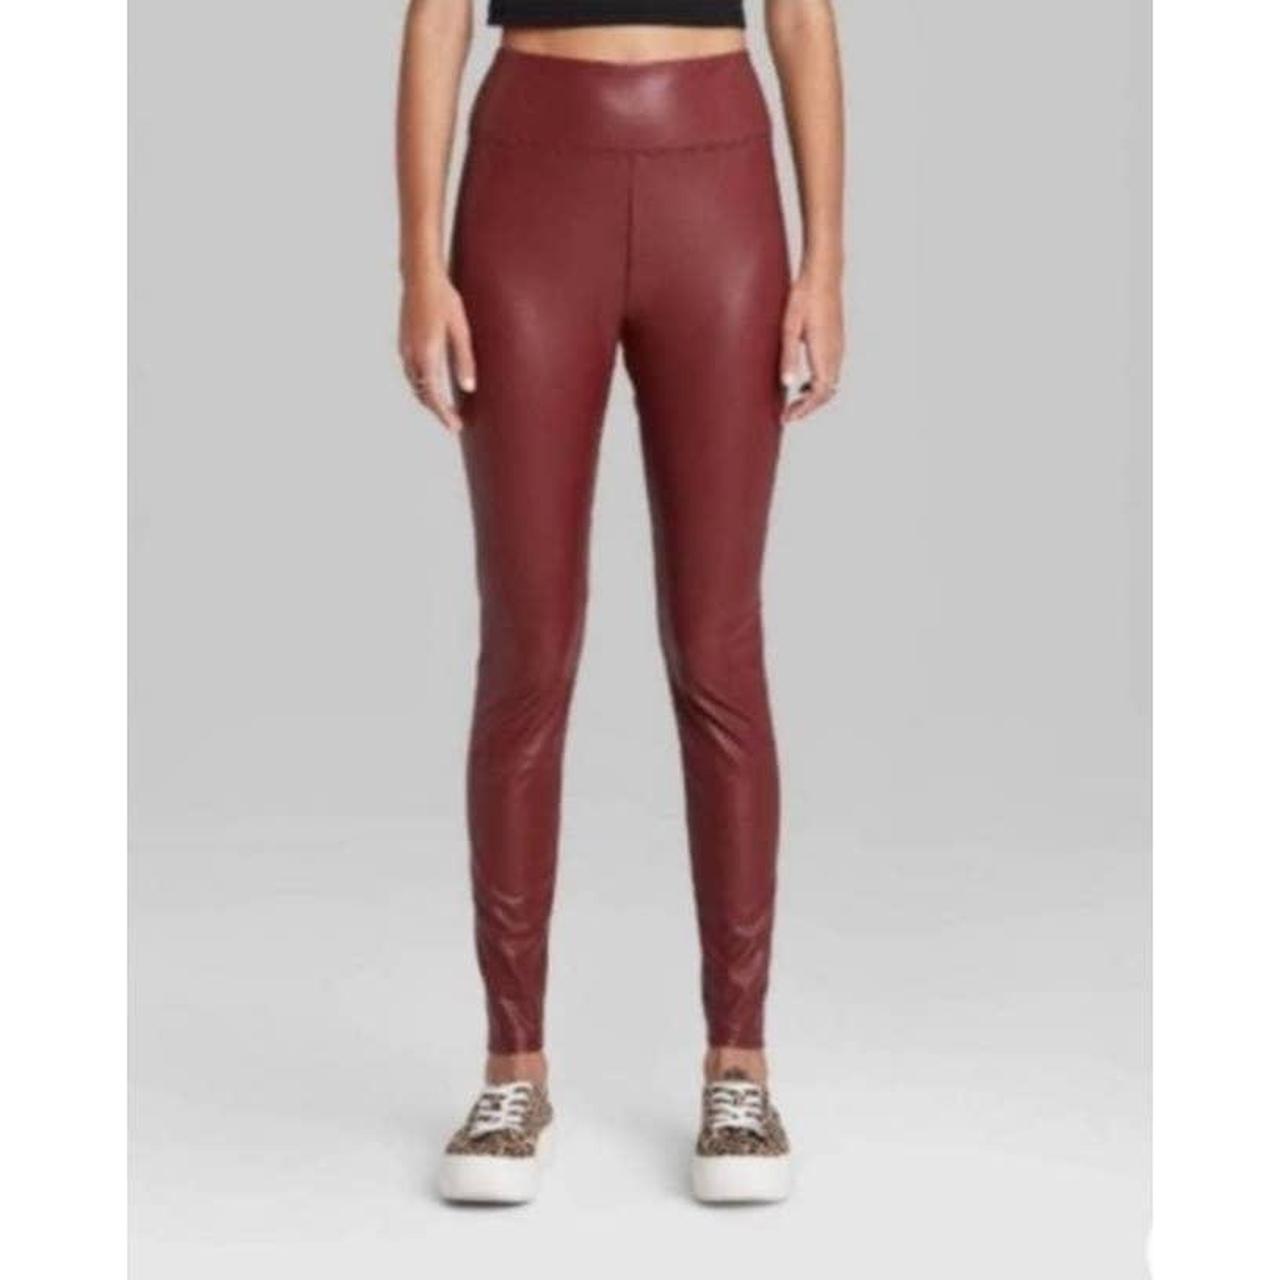 Wild Fable, High-Waisted Faux Leather Burgundy Leggings, US Women's L